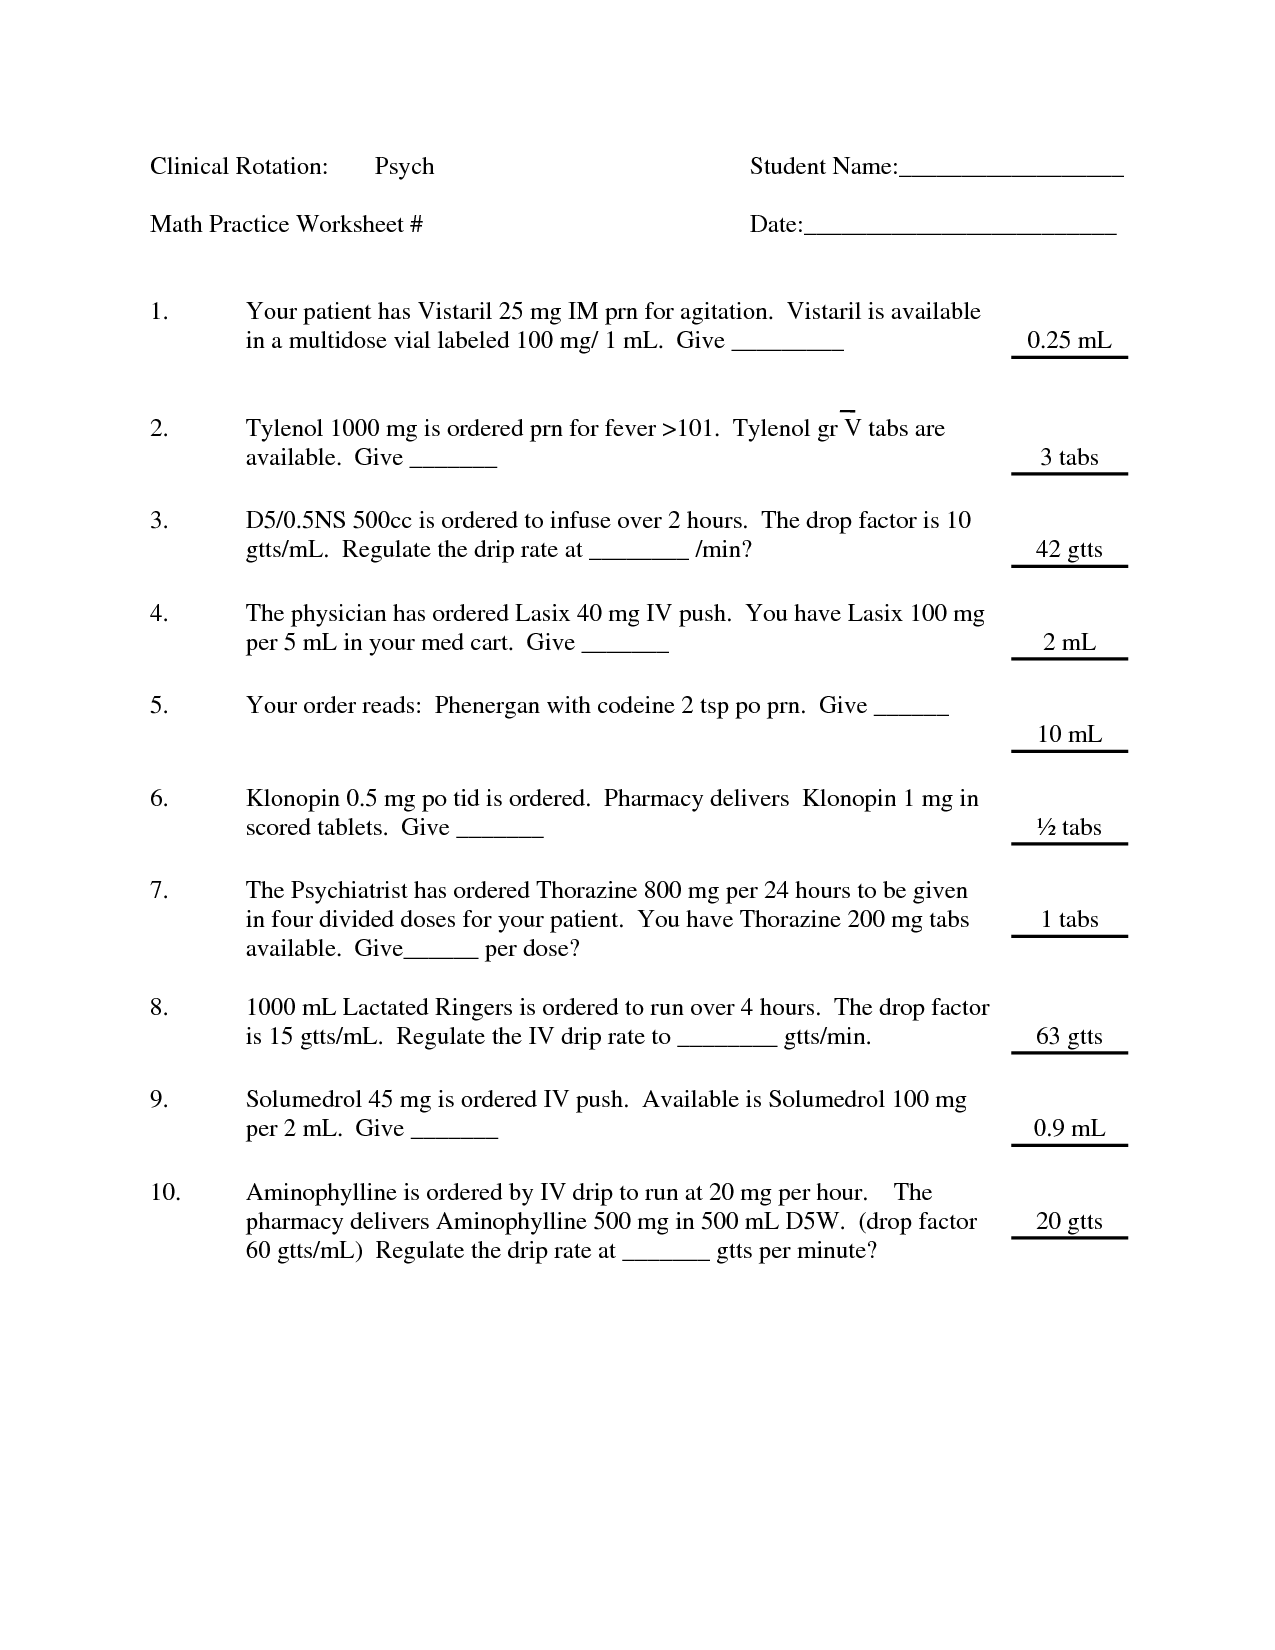 14 Best Images of College Geometry Worksheets - Area and ...